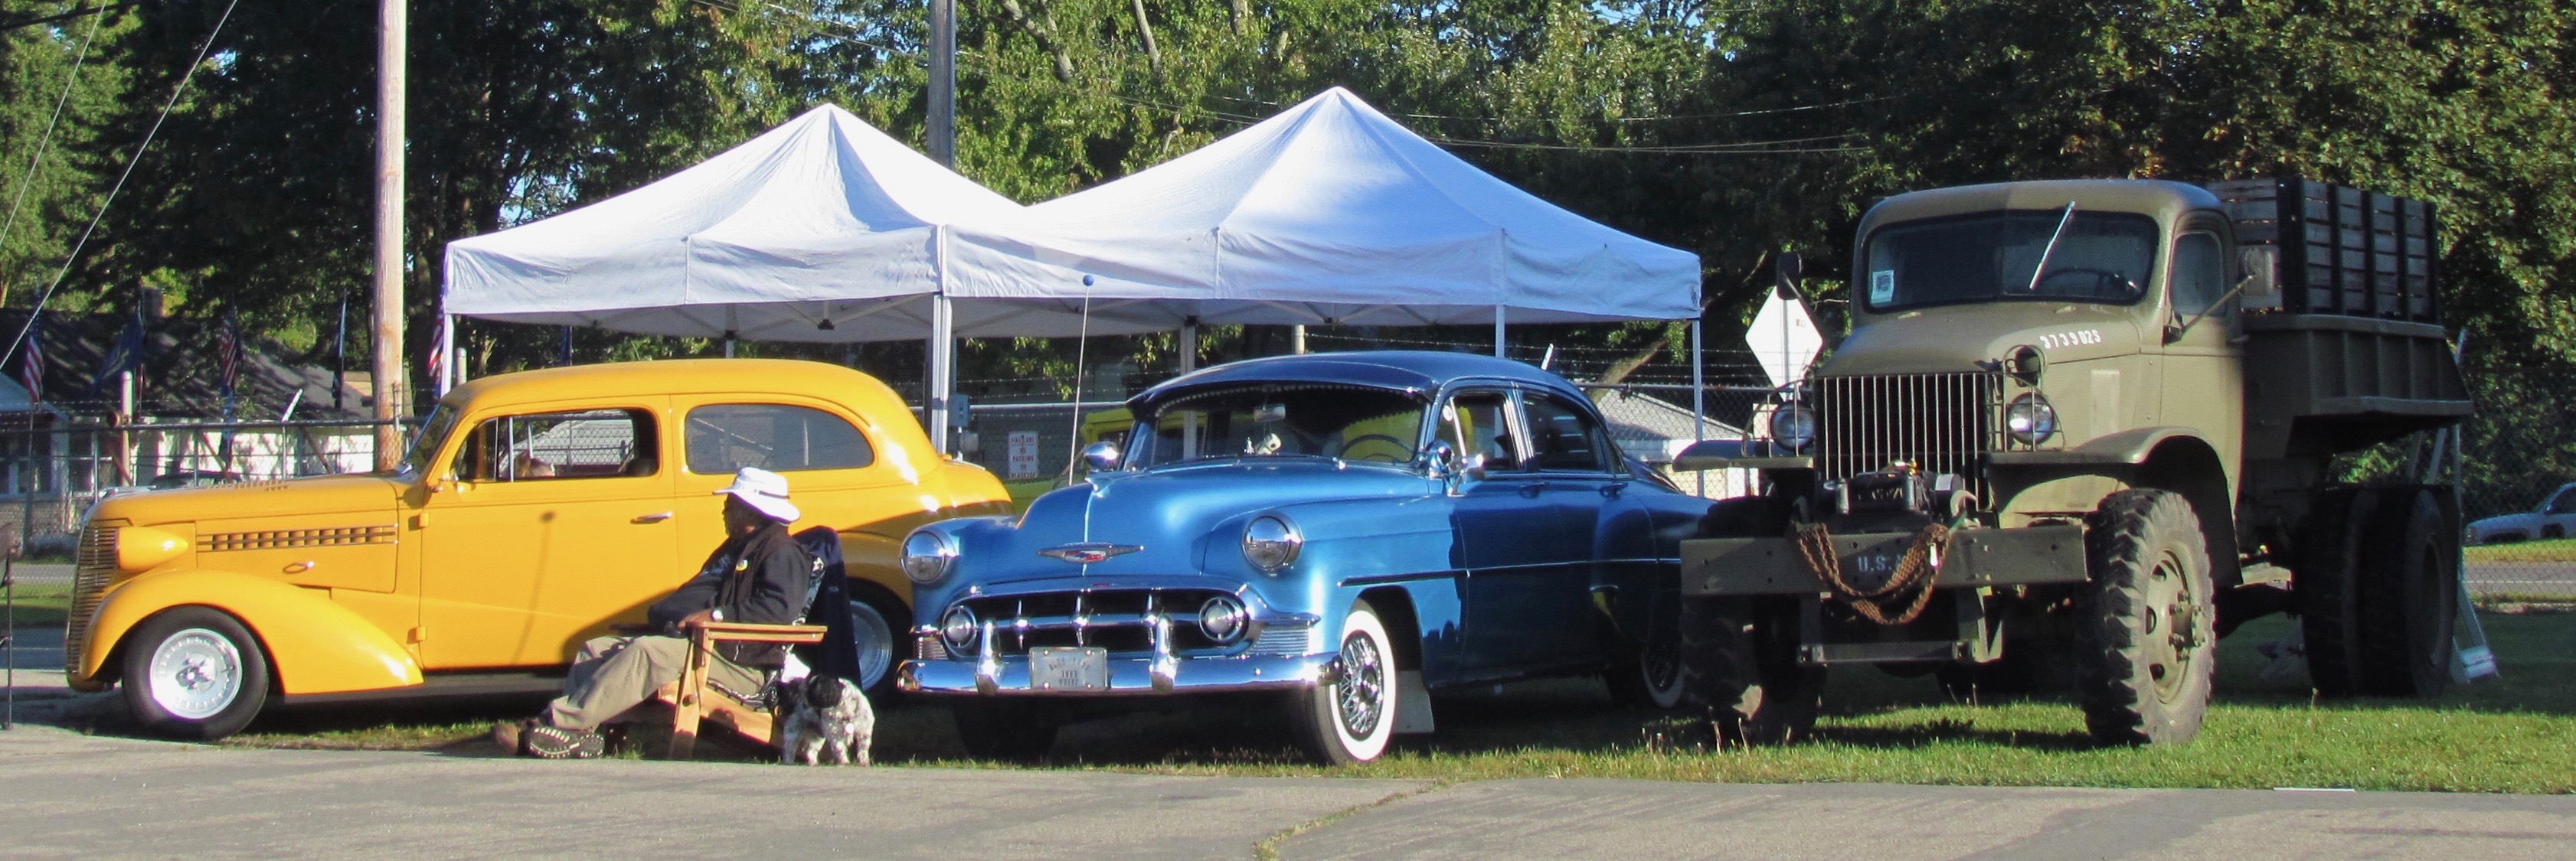 , Street rodders Nationals North becomes a neighborly affair, ClassicCars.com Journal